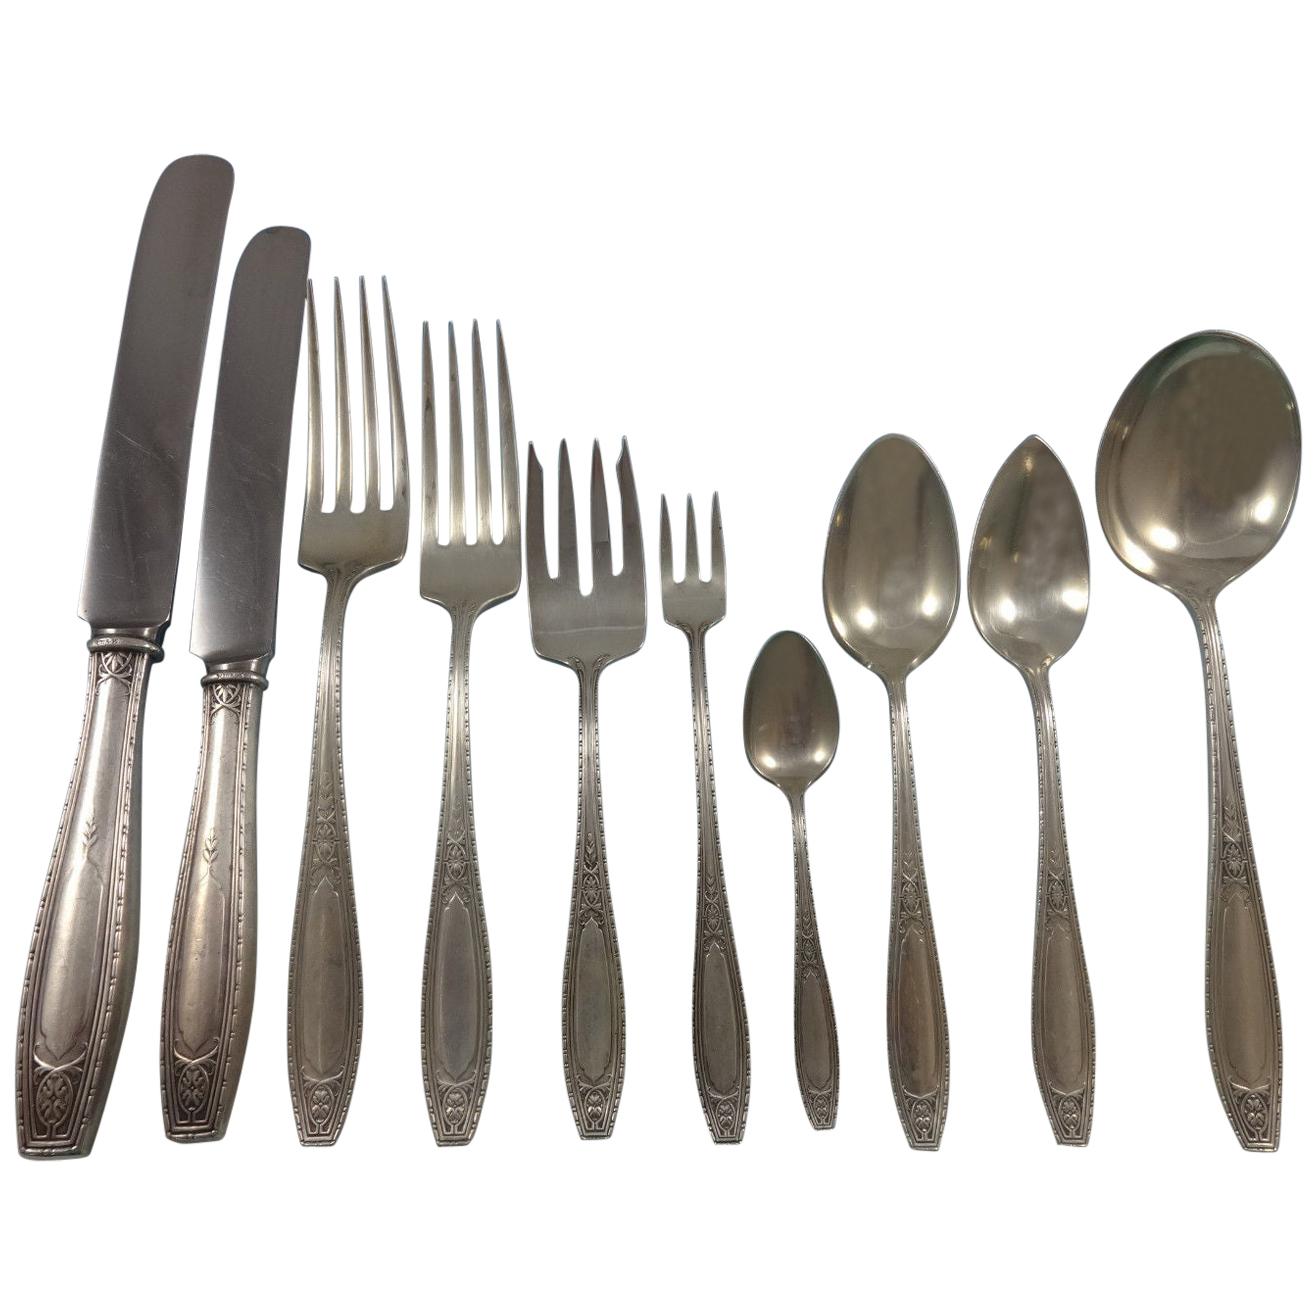 Juliet by Wallace Sterling Silver Flatware Dinner Set of 125 Pieces For Sale